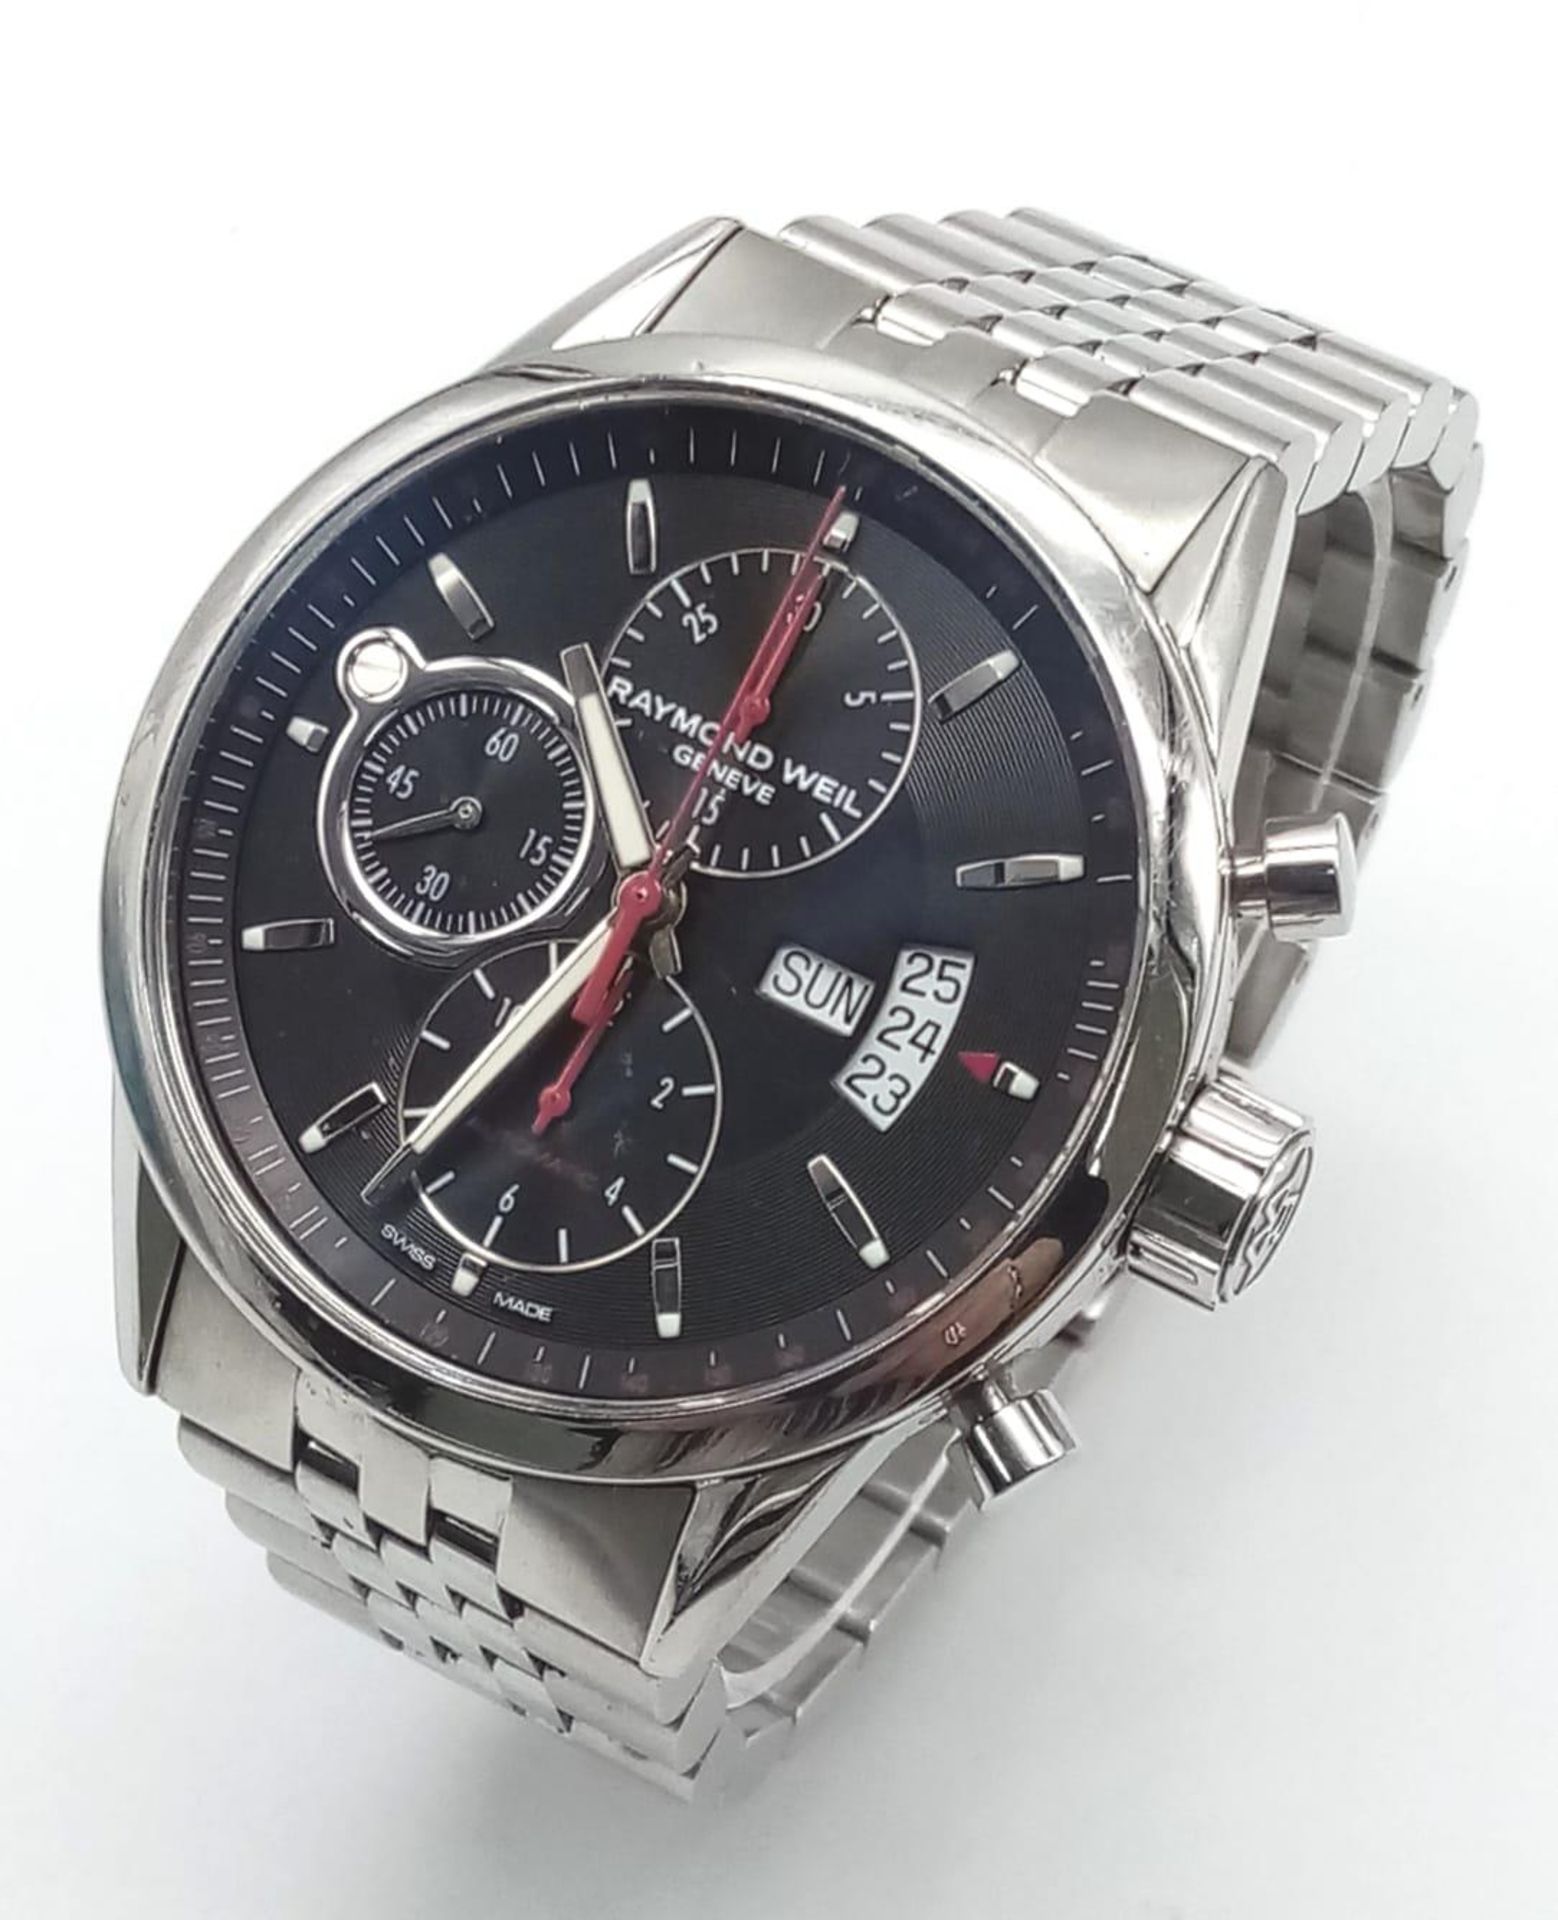 A Raymond Weil Automatic Chronograph Gents Watch. Stainless steel bracelet and case - 43mm. Black